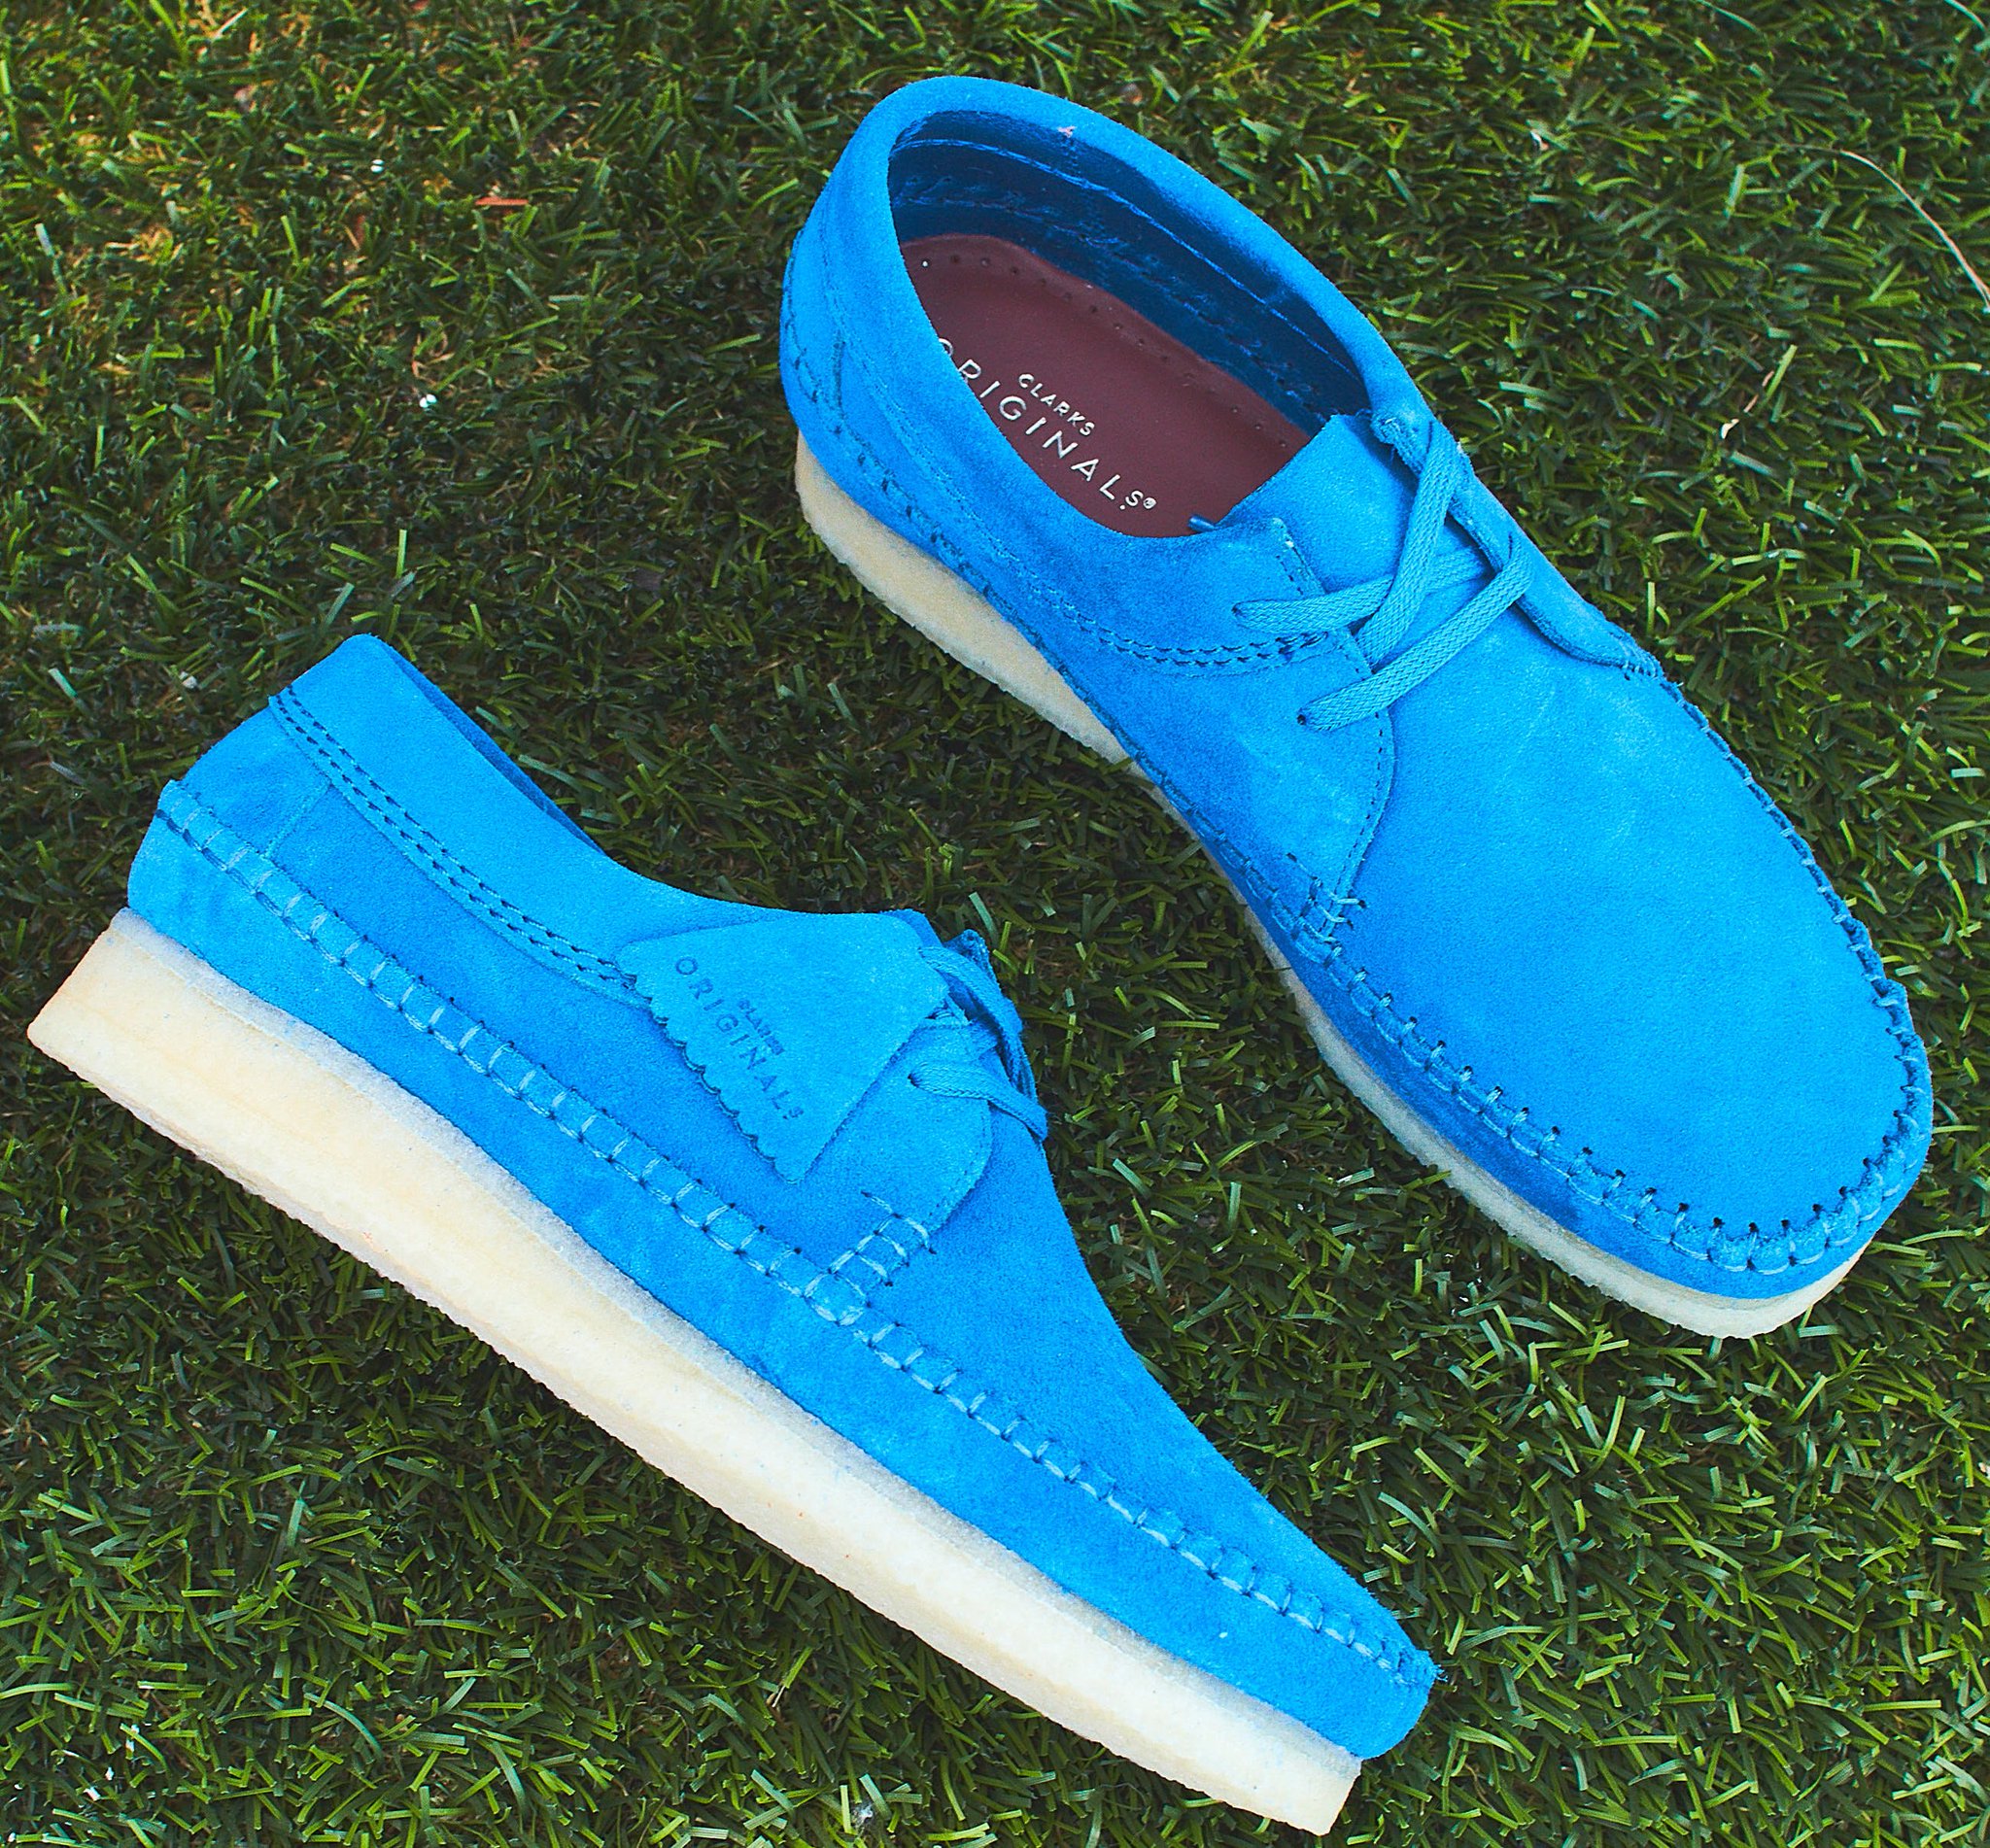 on Twitter: "Clarks Weaver available in Store and Online ( https://t.co/6KHP5HeQ8z ) in Ocean Blue Suede ($160) @properlbc https://t.co/MzQcaBRhMp" / Twitter